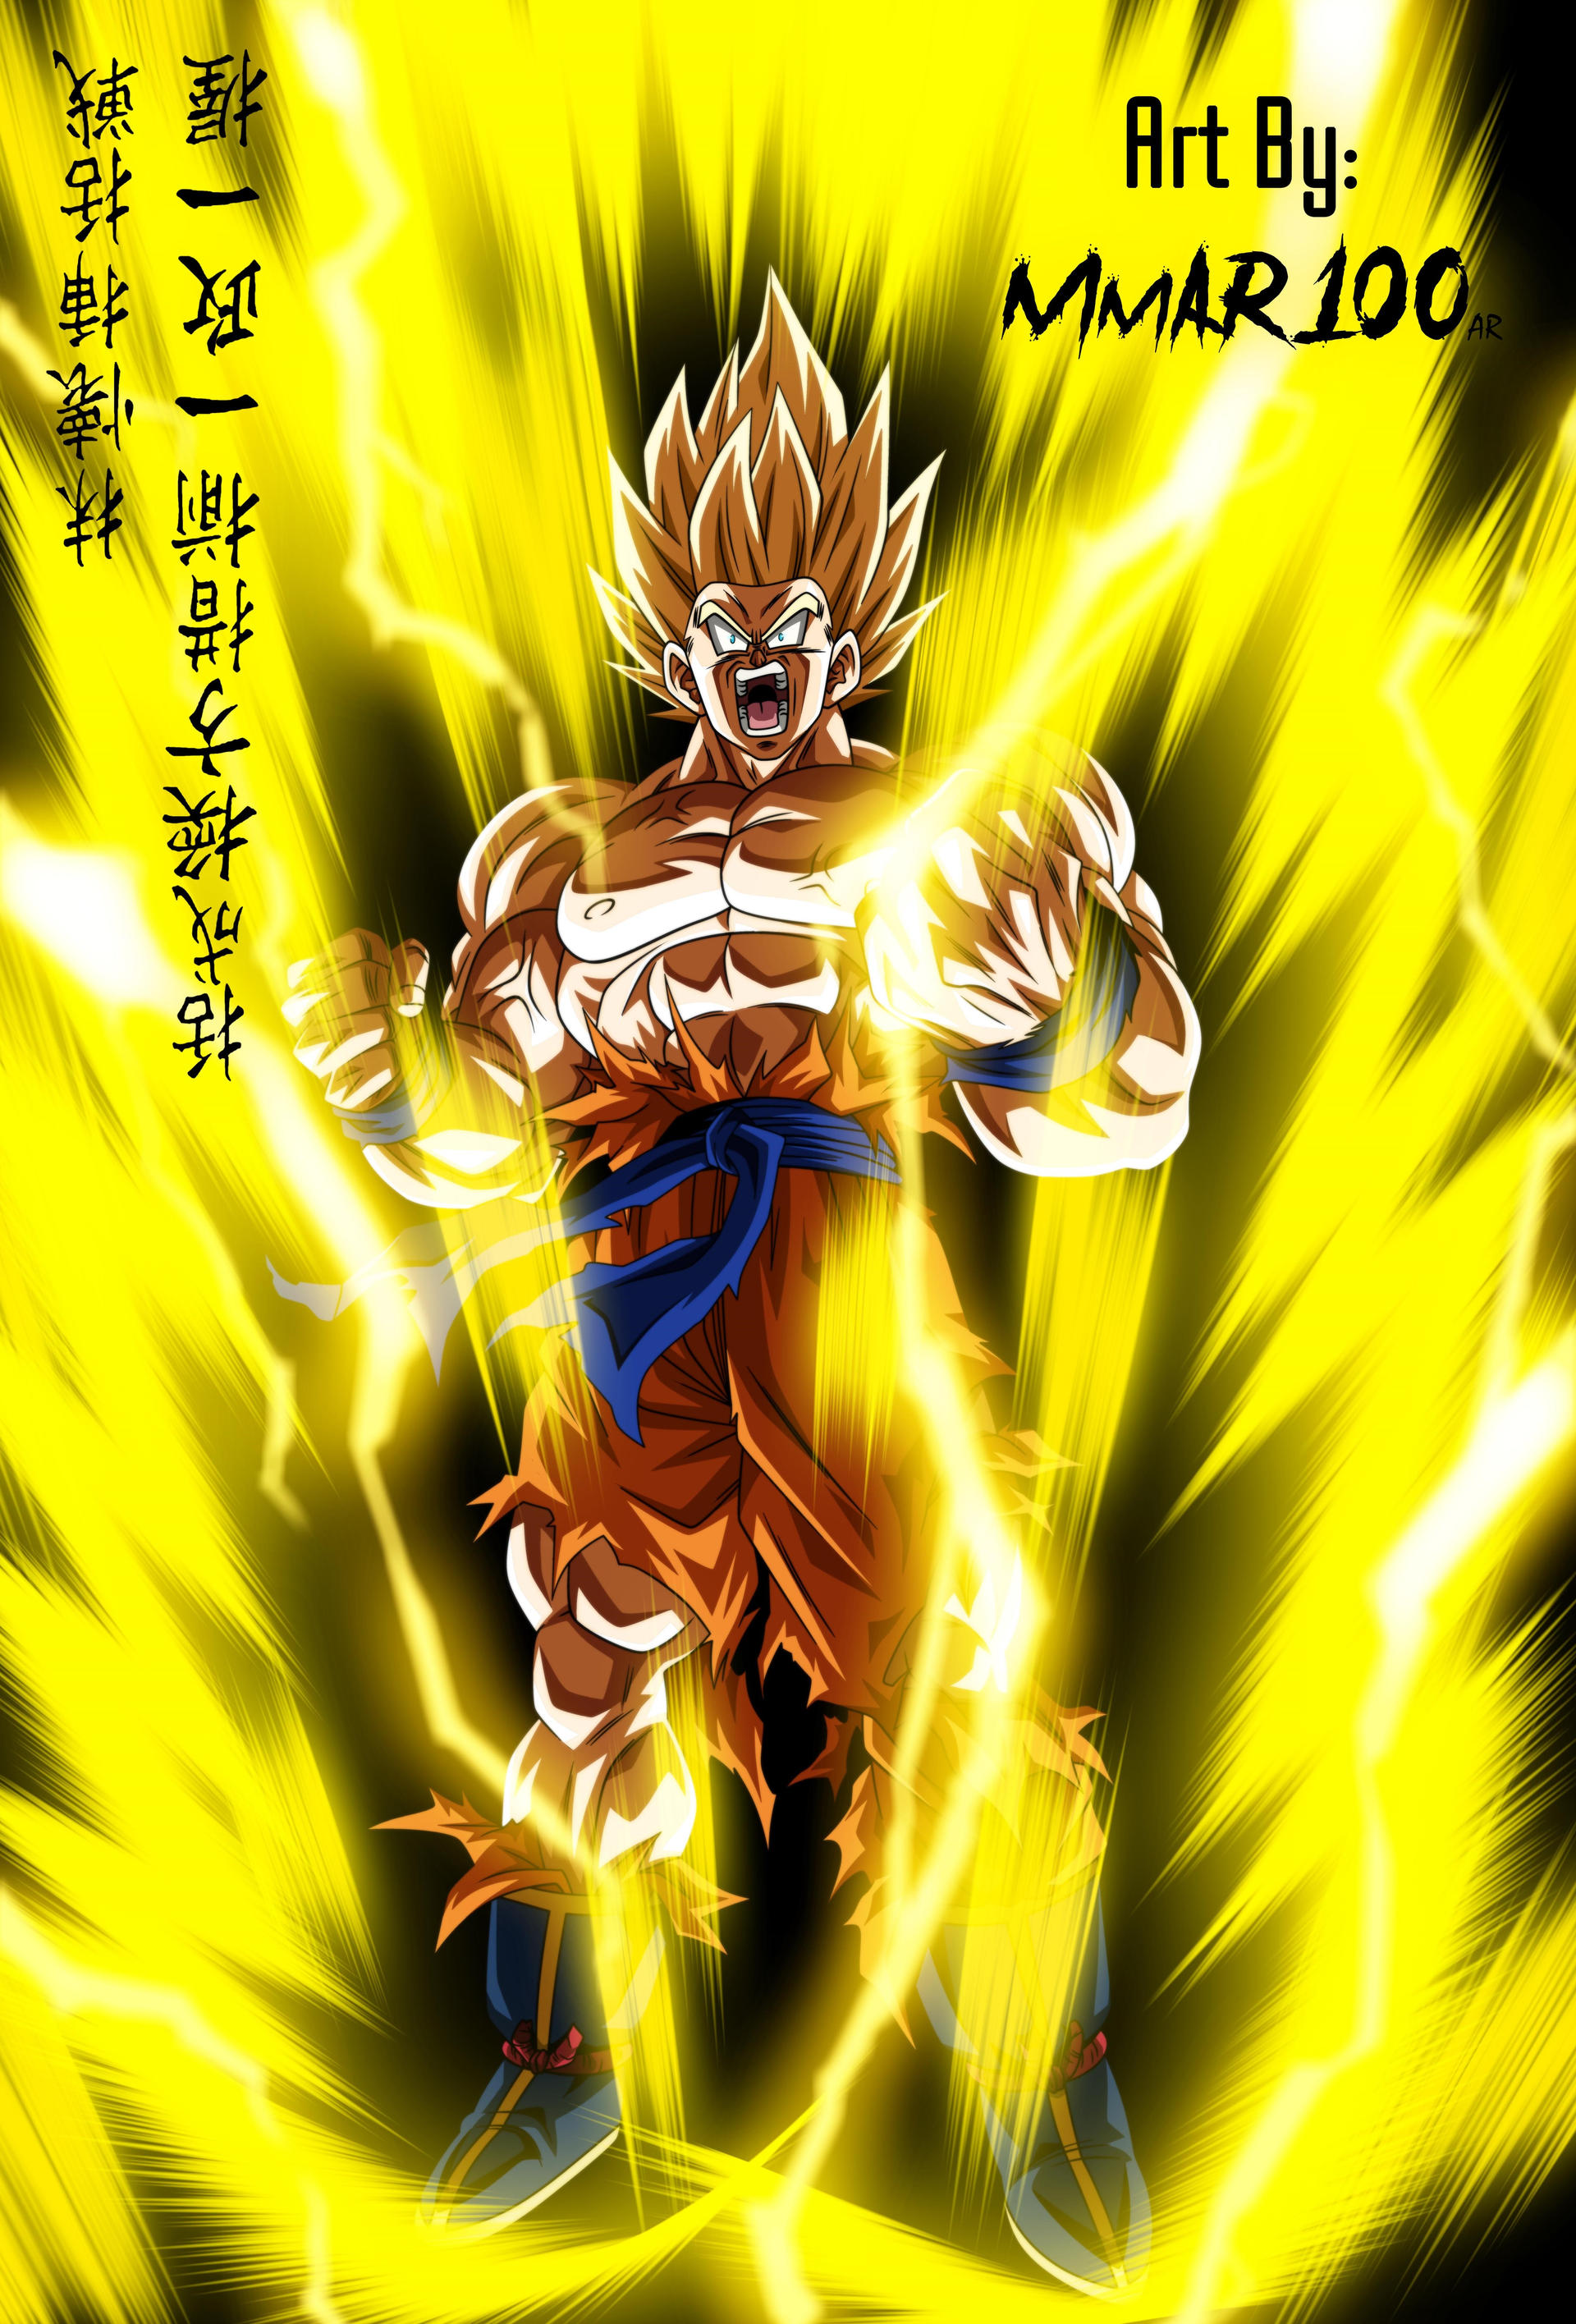 Download Goku powers up to Super Saiyan level in the amazing